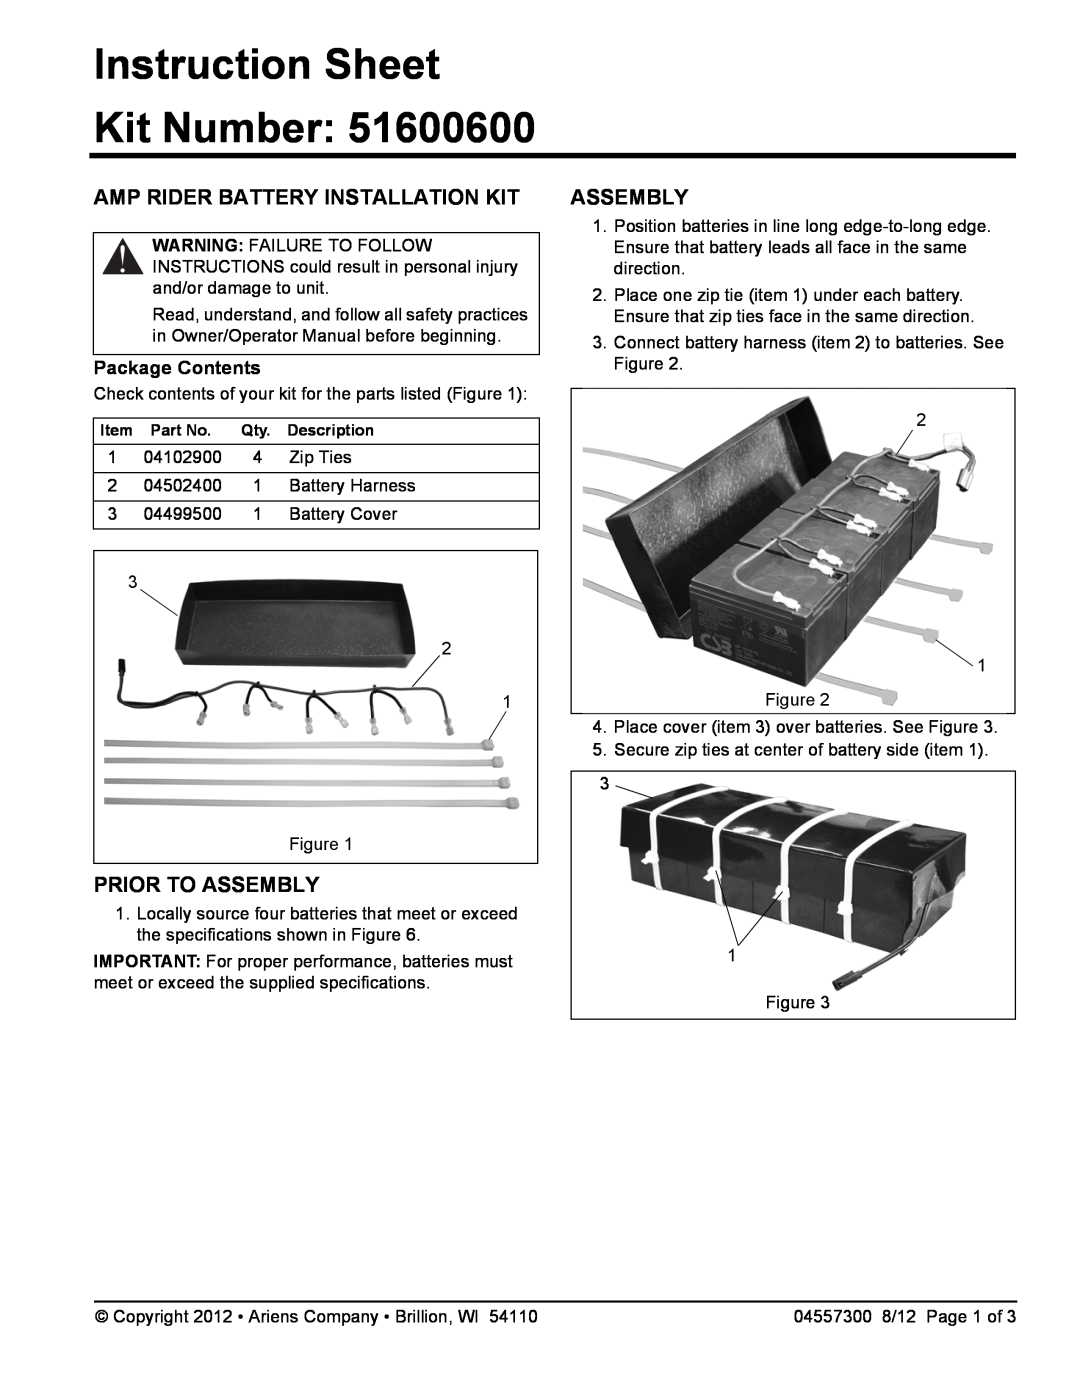 Ariens 916302 Instruction Sheet Kit Number, Amp Rider Battery Installation Kit, Prior To Assembly, Package Contents 